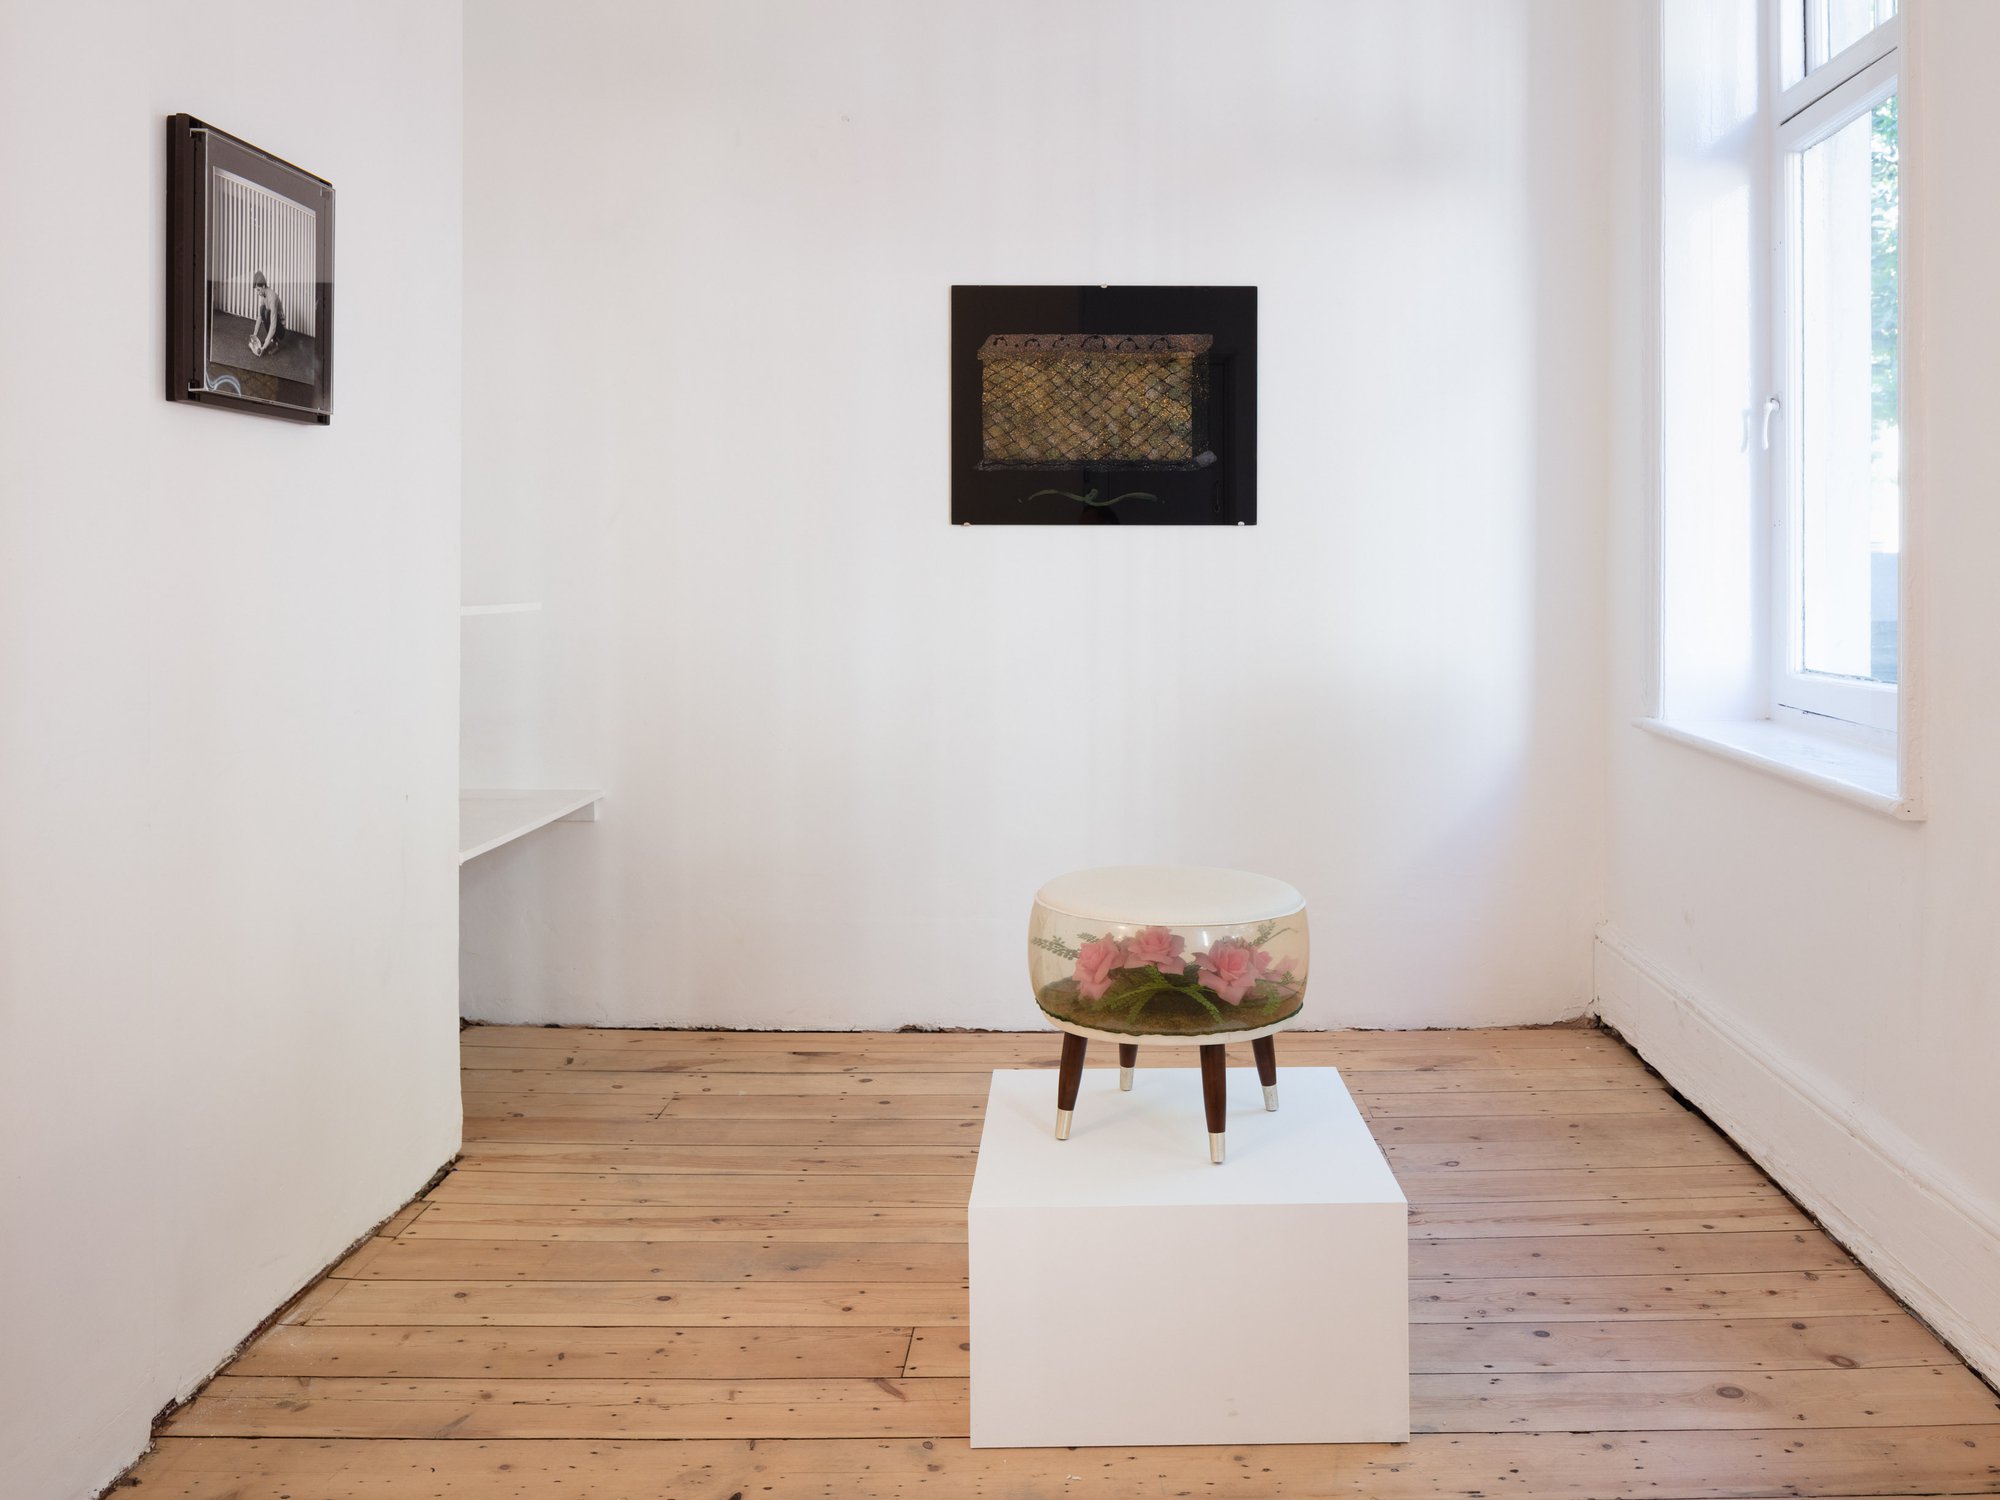 Installation view, Ian Law and Aaron Angell, early monodies, Rodeo, London, 2018